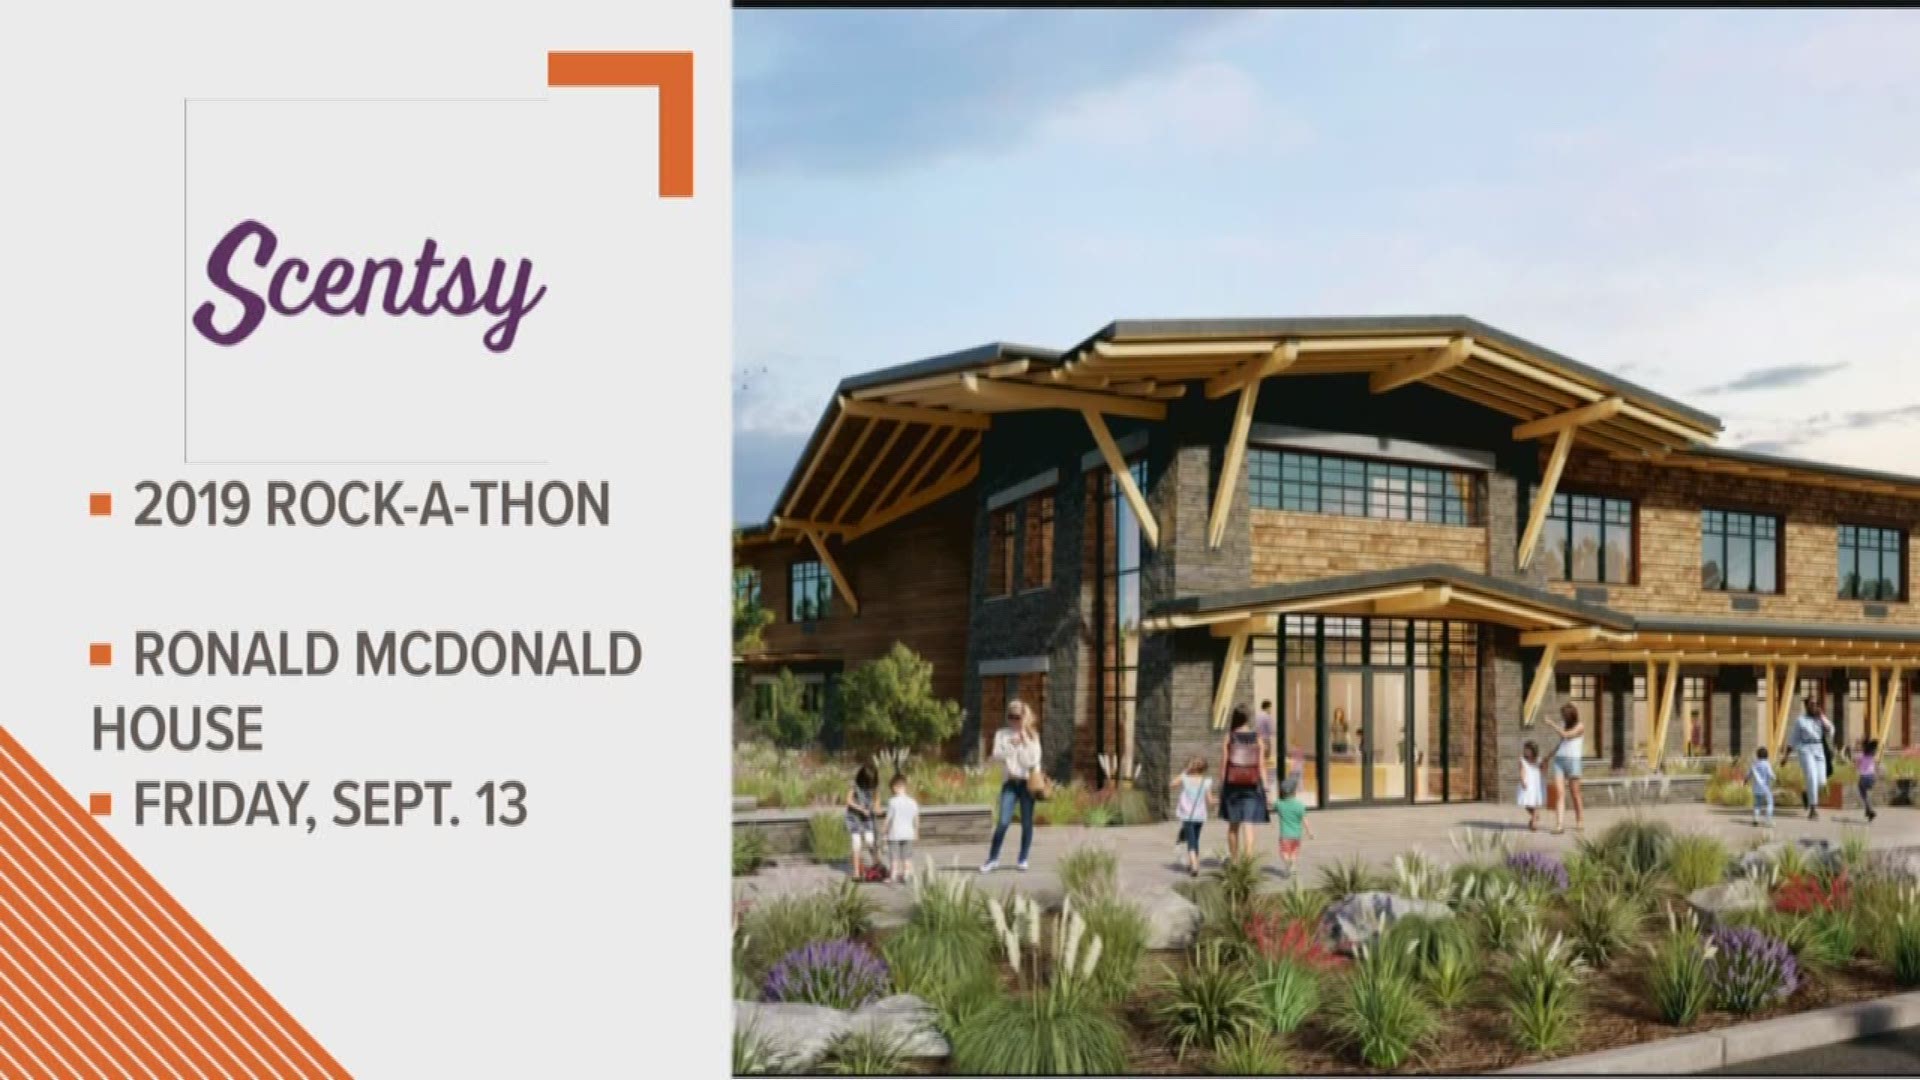 This event is a fundraiser for the Ronald McDonald, which is looking to build a new facility.